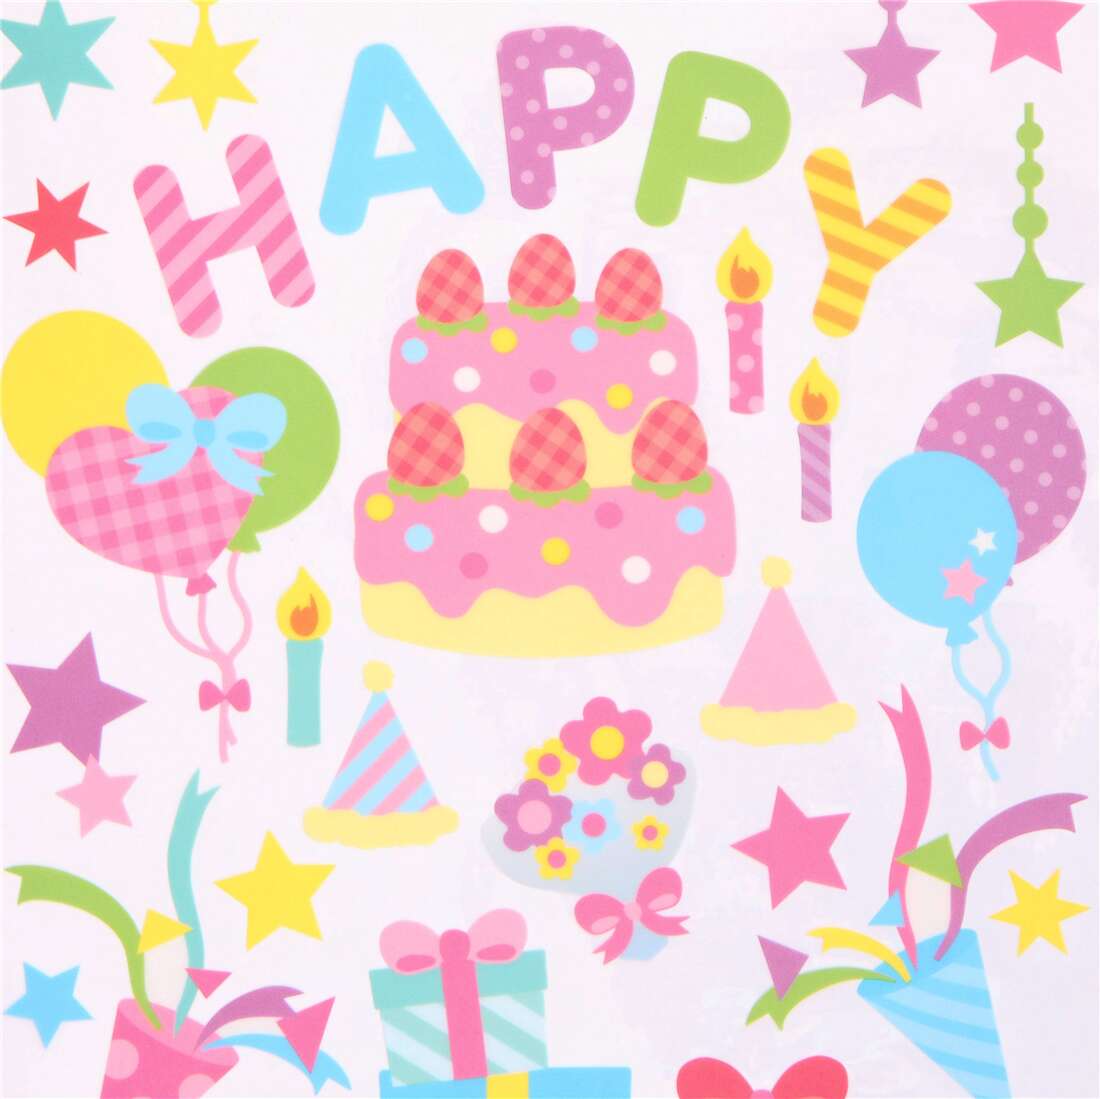 Cute Illustrative Floral Cake & Candles Daughter Birthday Card | Moonpig